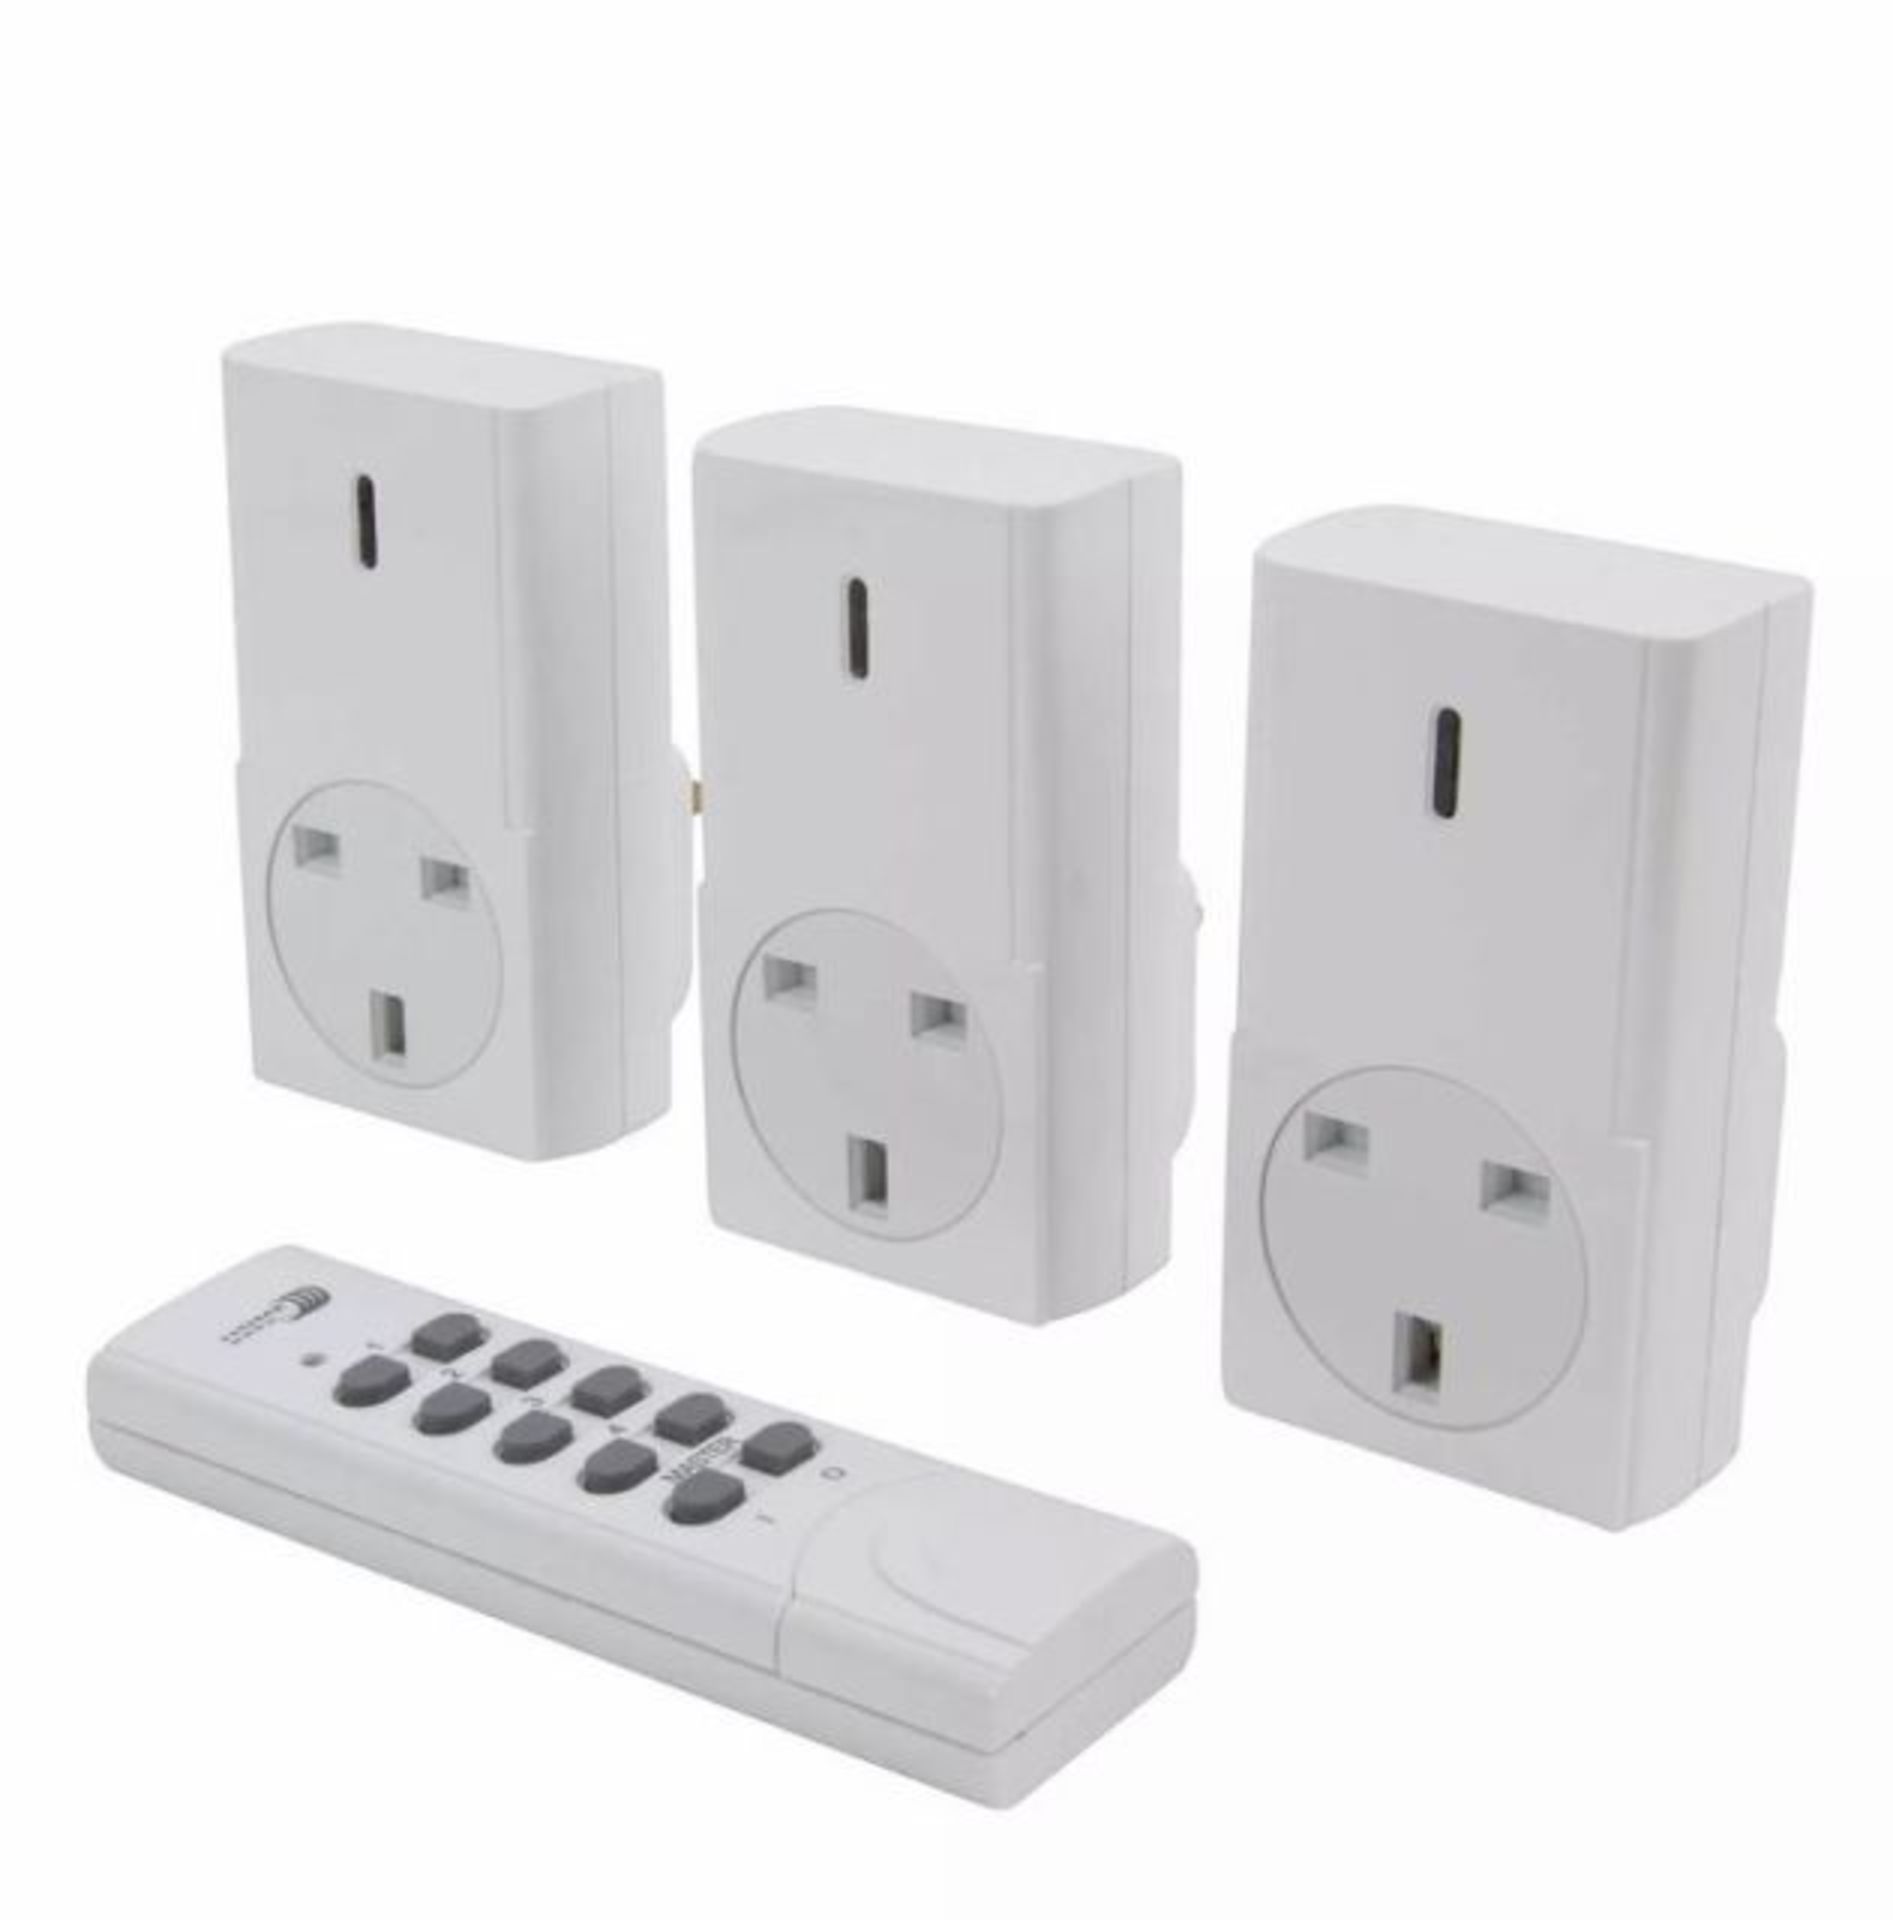 V Brand New Indoor Remote Control Sockets with Four Receivers and Programmable remote control with